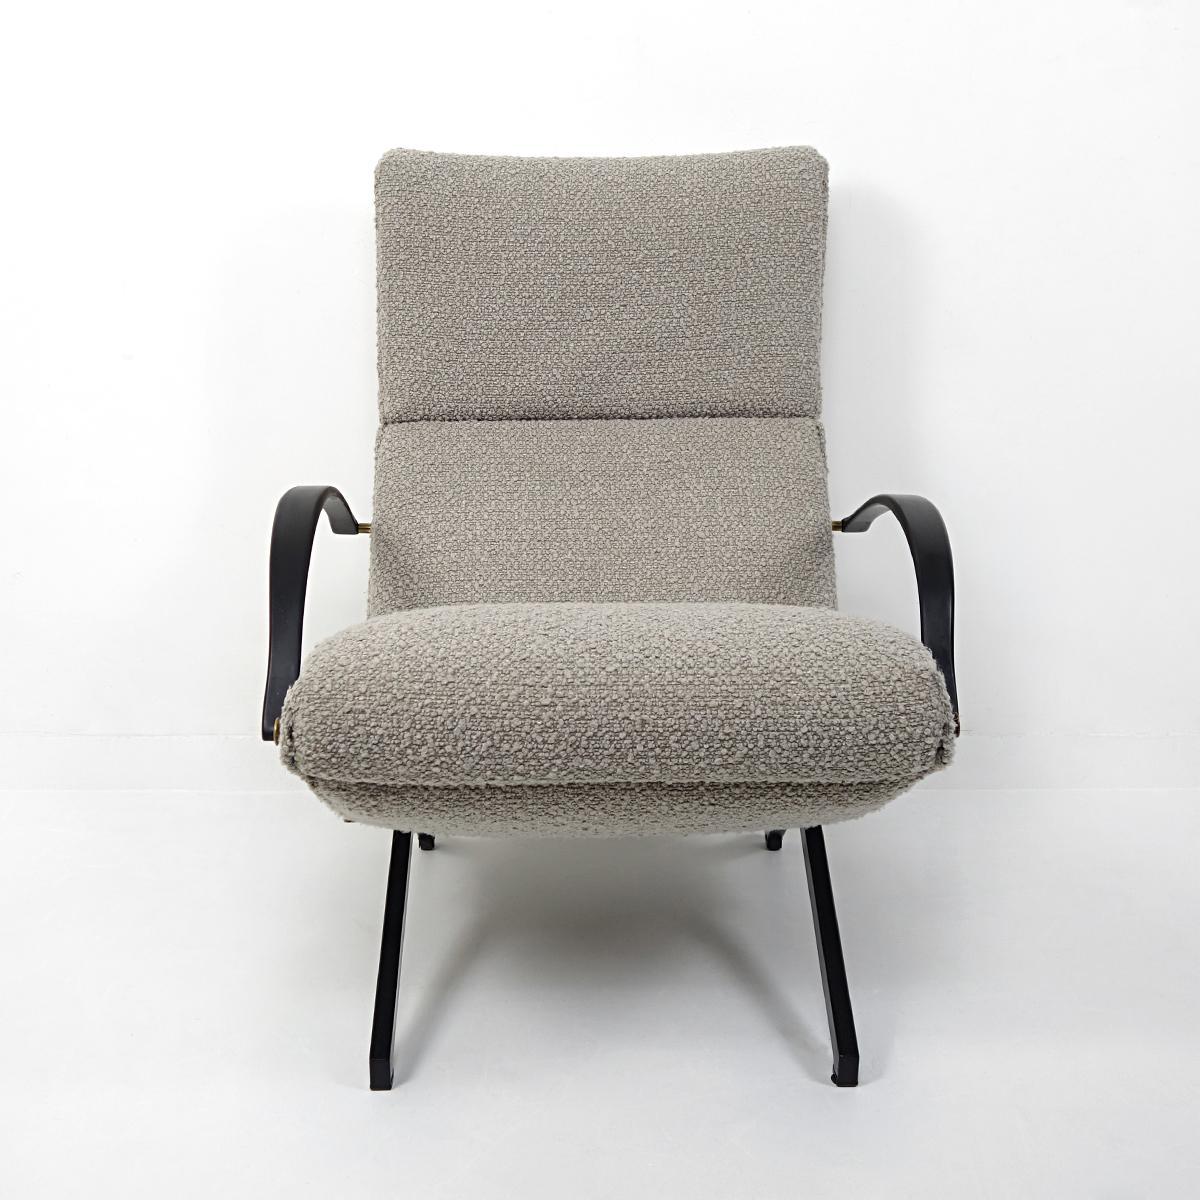 The P40 lounge chair was designed by Osvaldo Borsani for Tecno.

This iconic piece is adjustable in many ways: the headrest can be pulled out, the position of the back rest may vary from high up to completely down, the lower leg support can be up